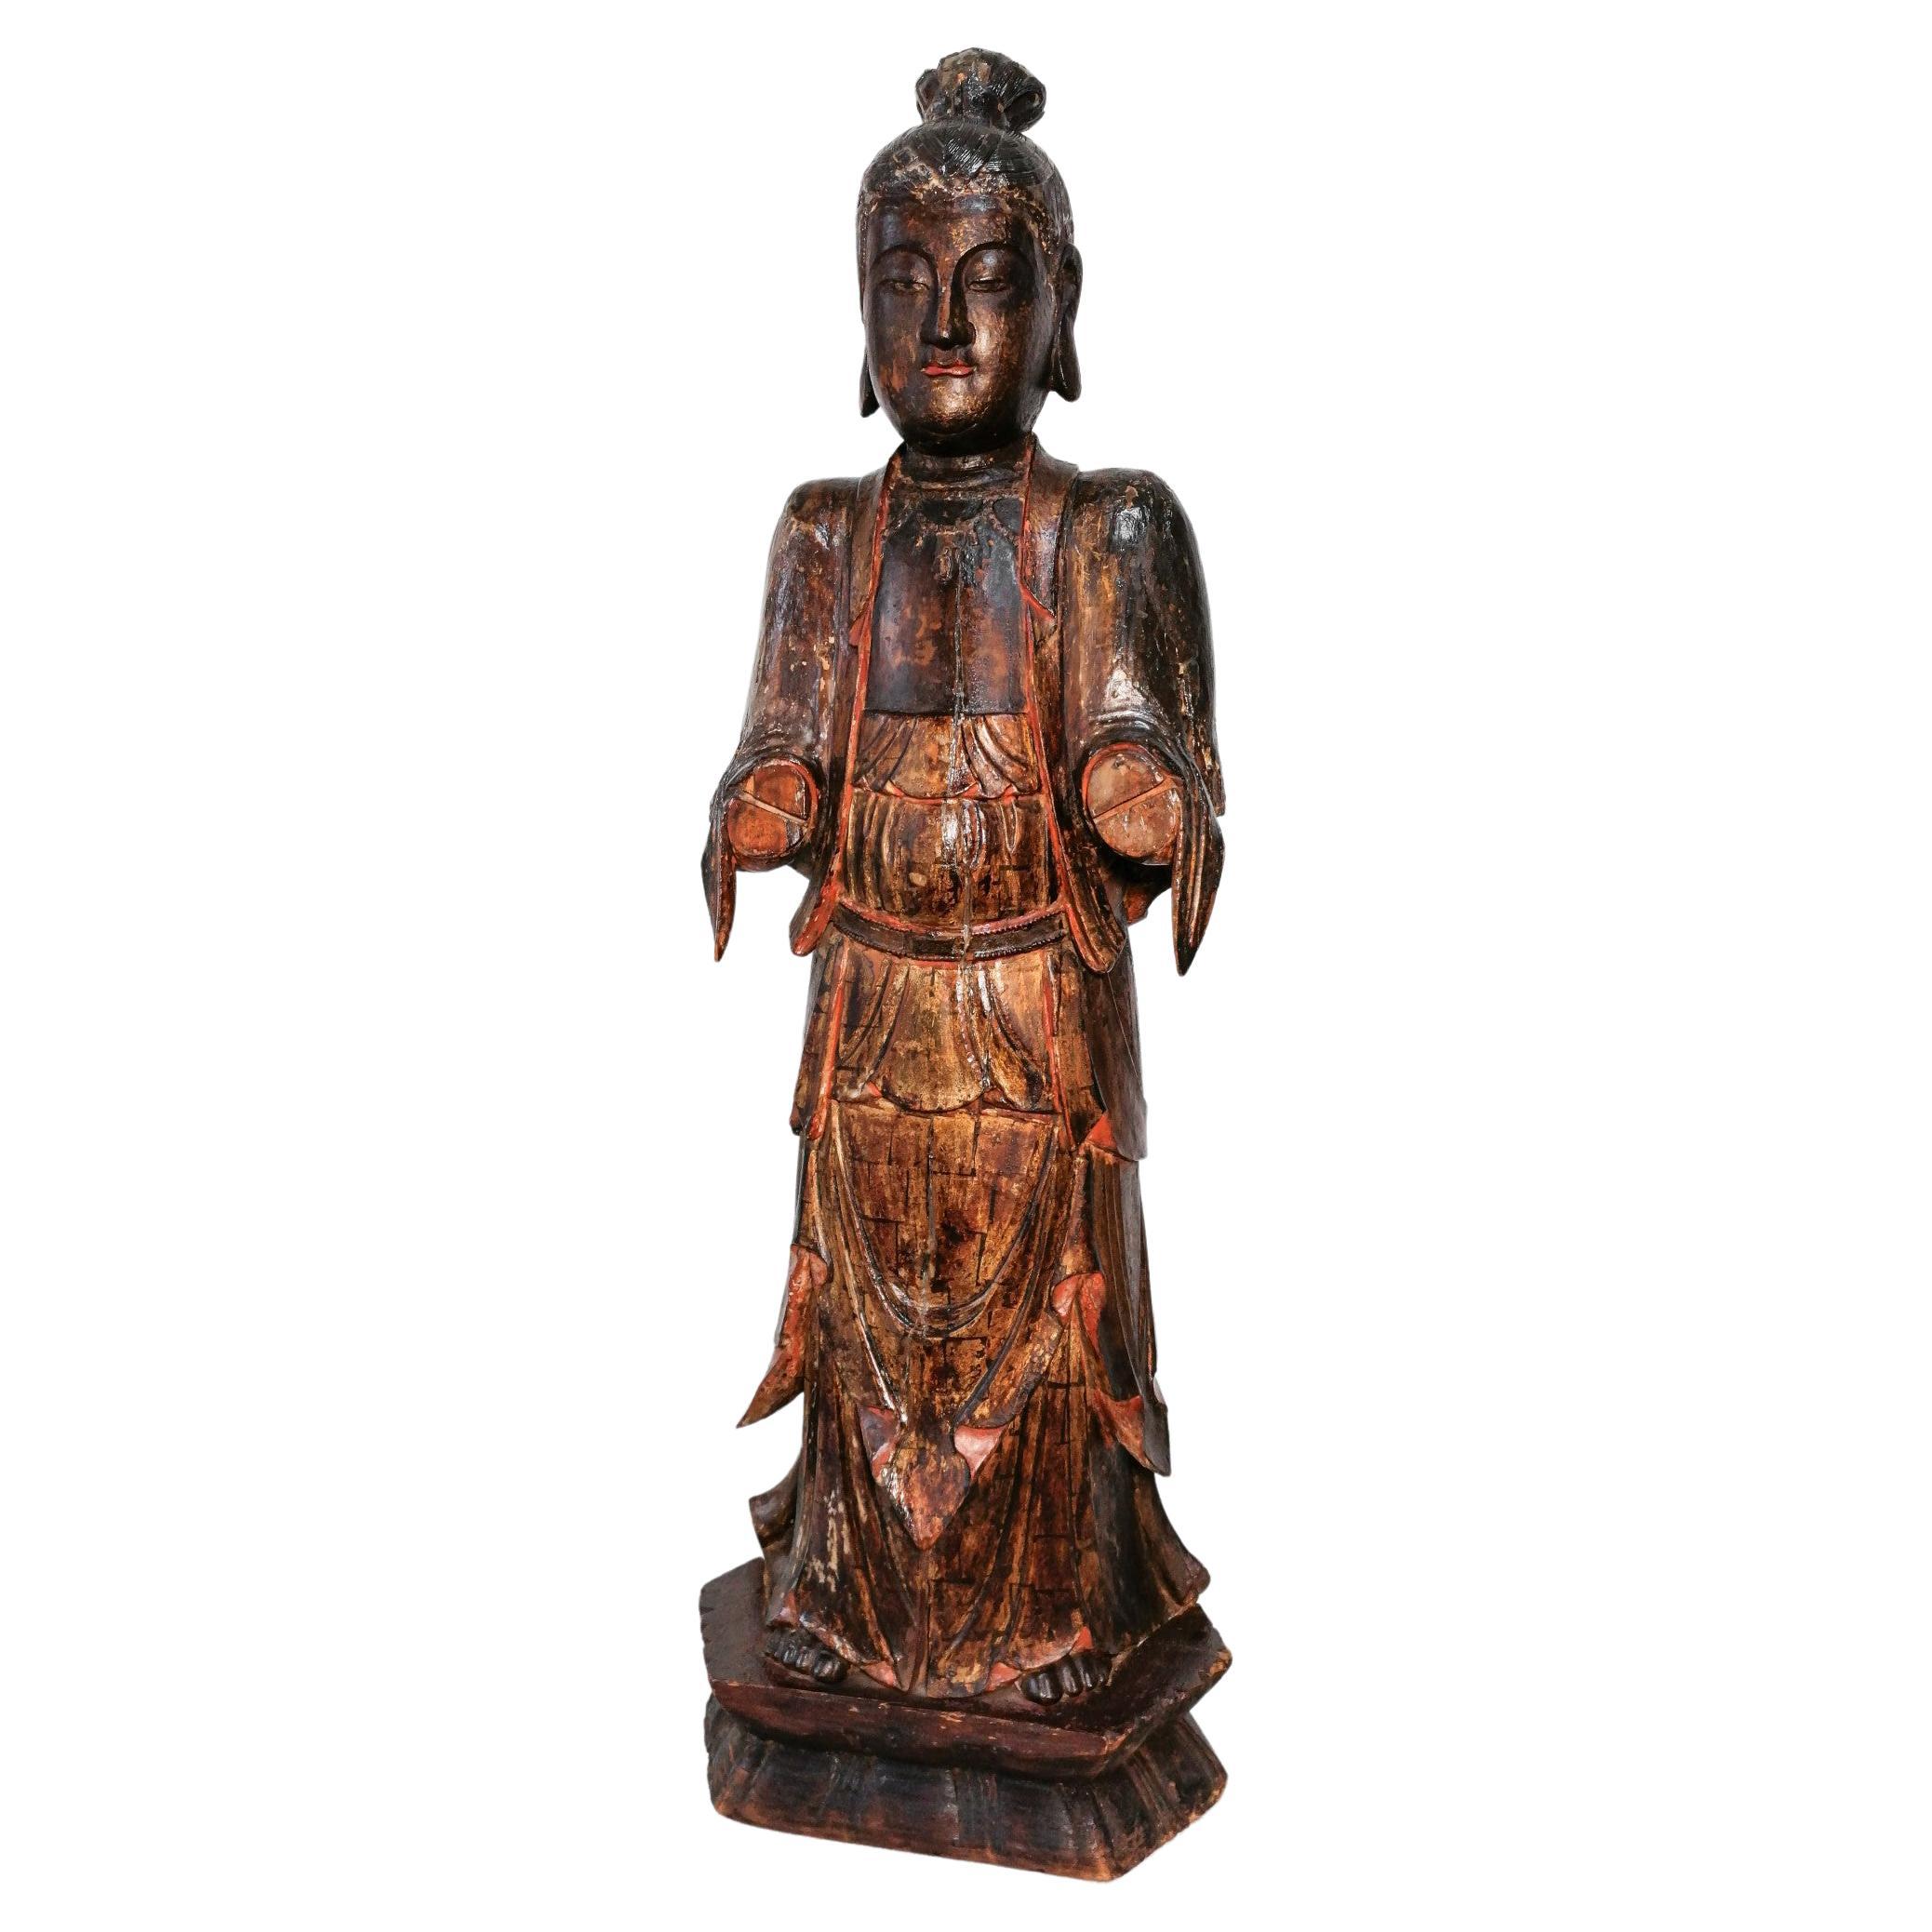 Ancient Wooden Sculpture of the Goddess Guan Yin, China, 17th / 18th Century